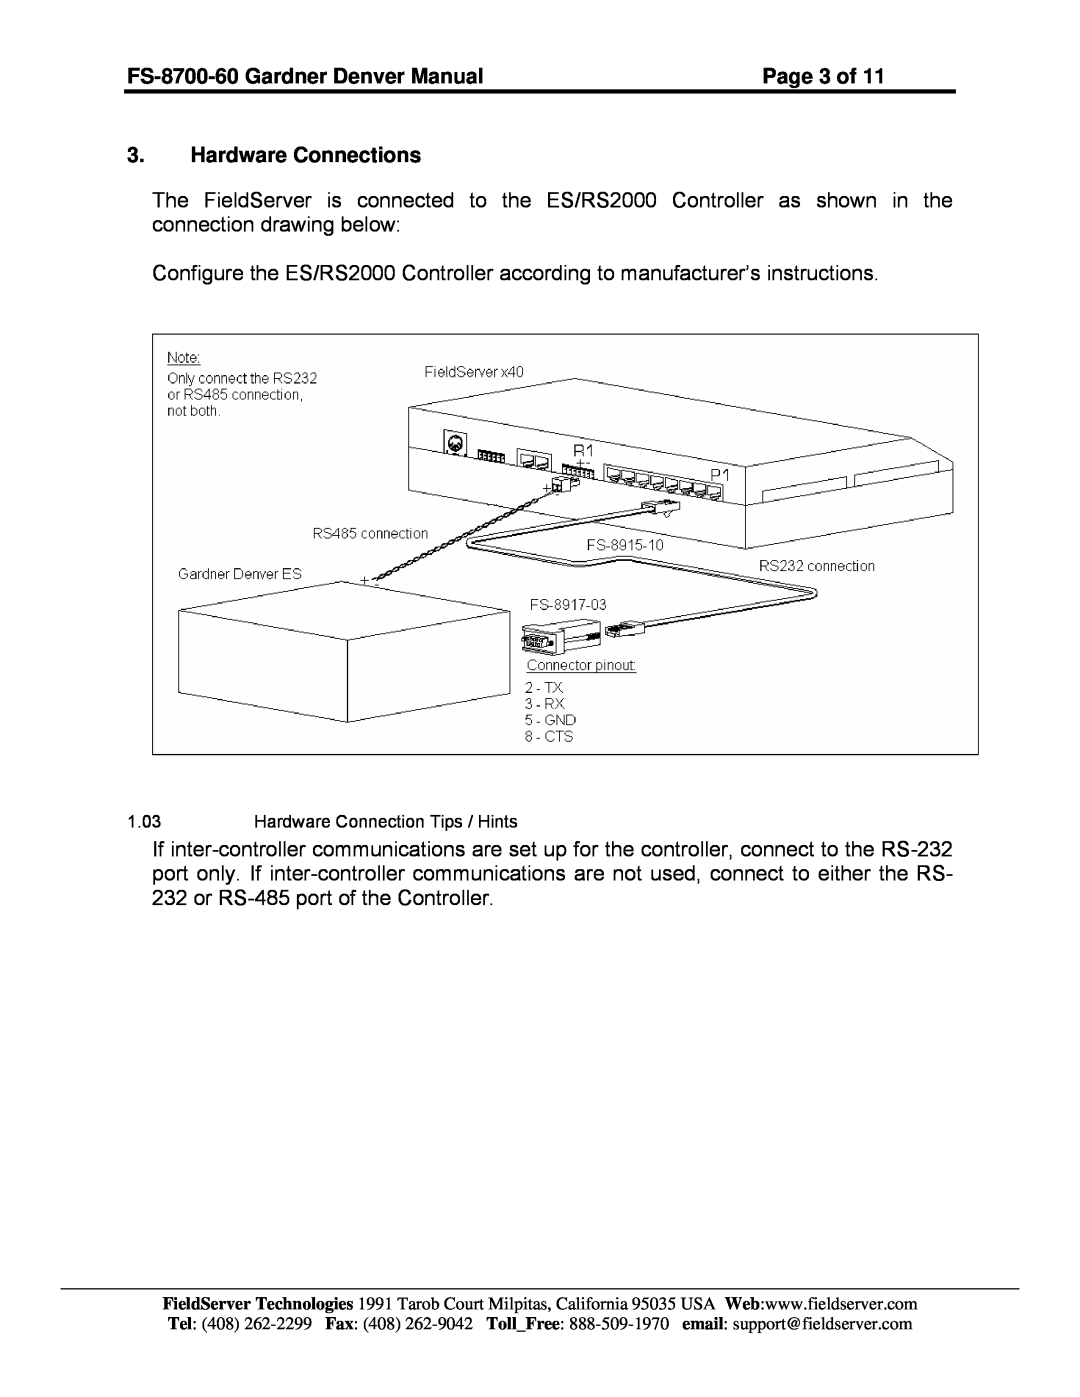 FieldServer Page 3 of, Hardware Connections, FS-8700-60 Gardner Denver Manual, Hardware Connection Tips / Hints 